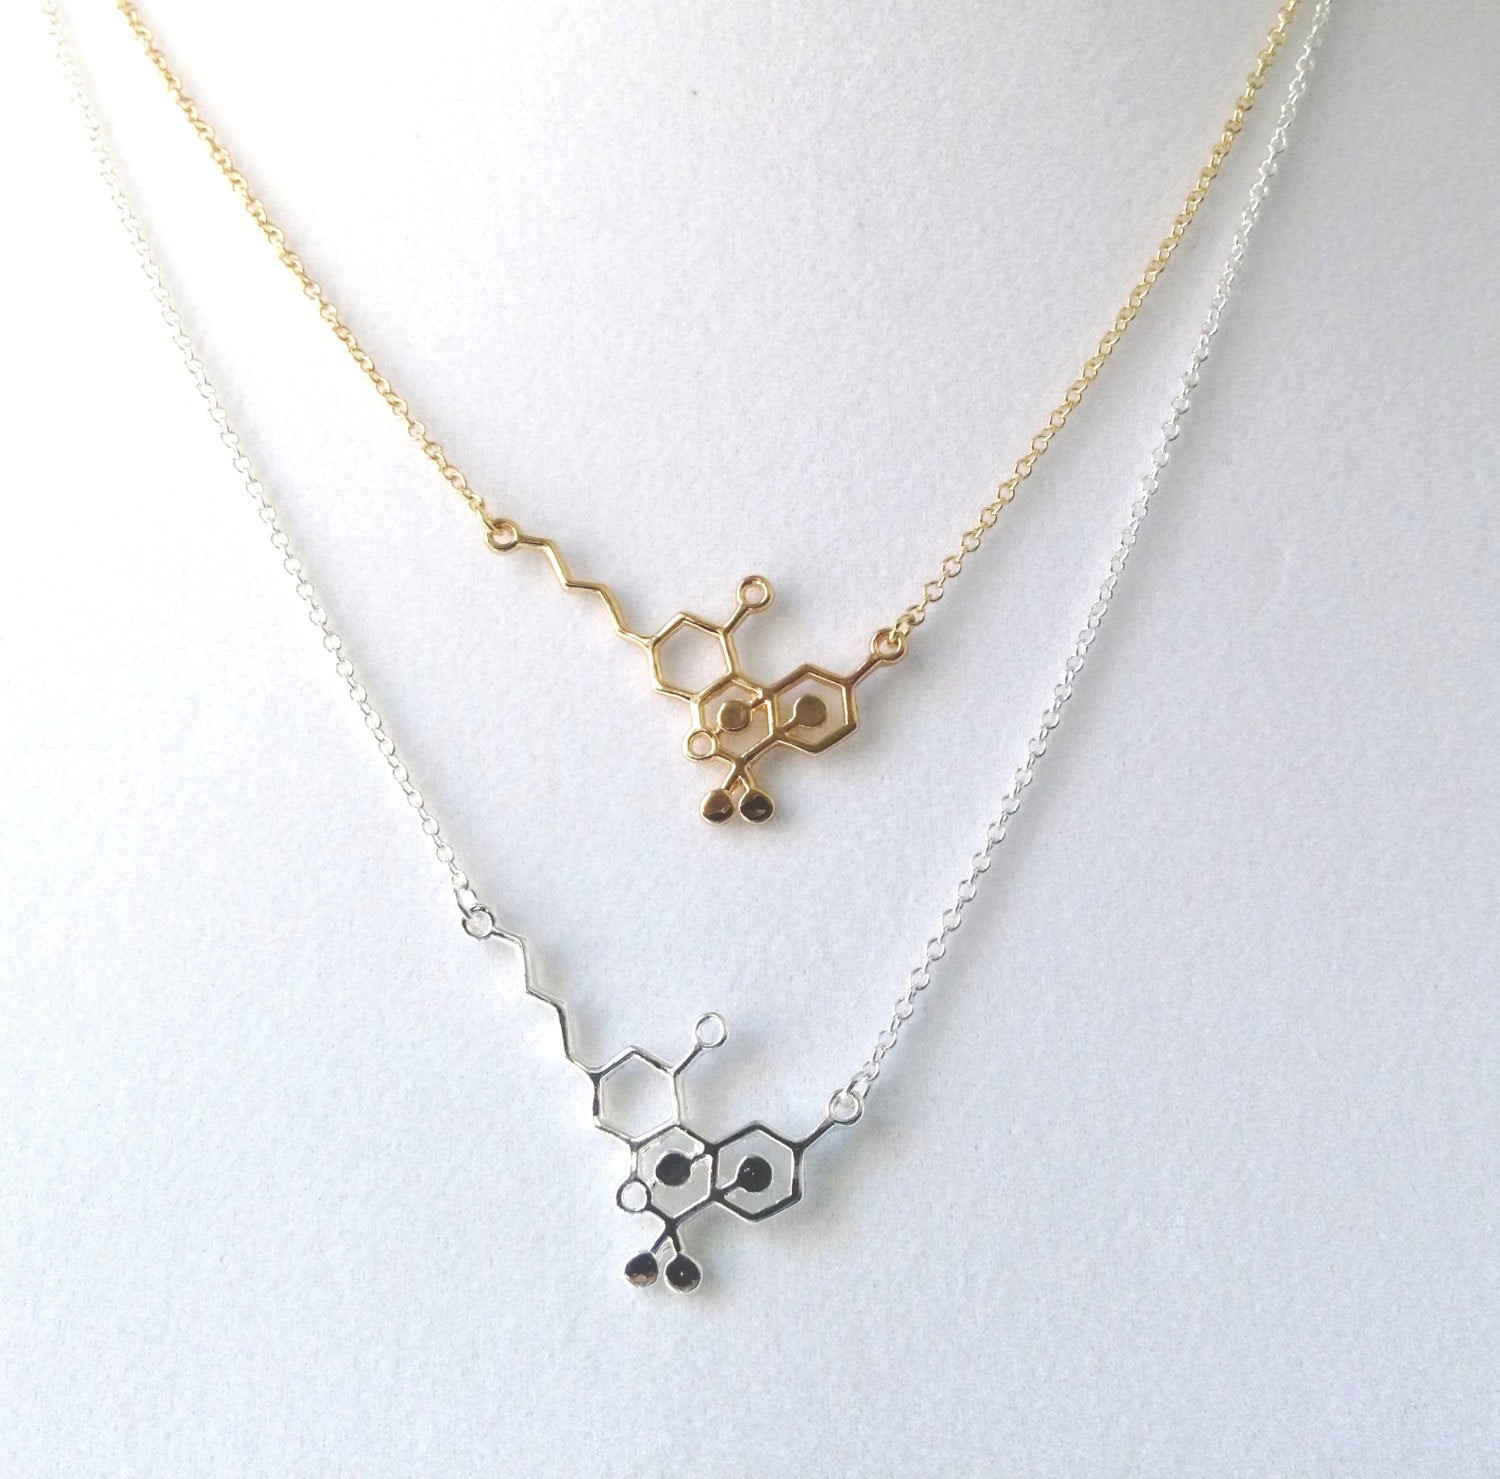 Thc Molecule Necklace
 THC CBD Molecule Necklace Gold or Silver by piccadillypendants